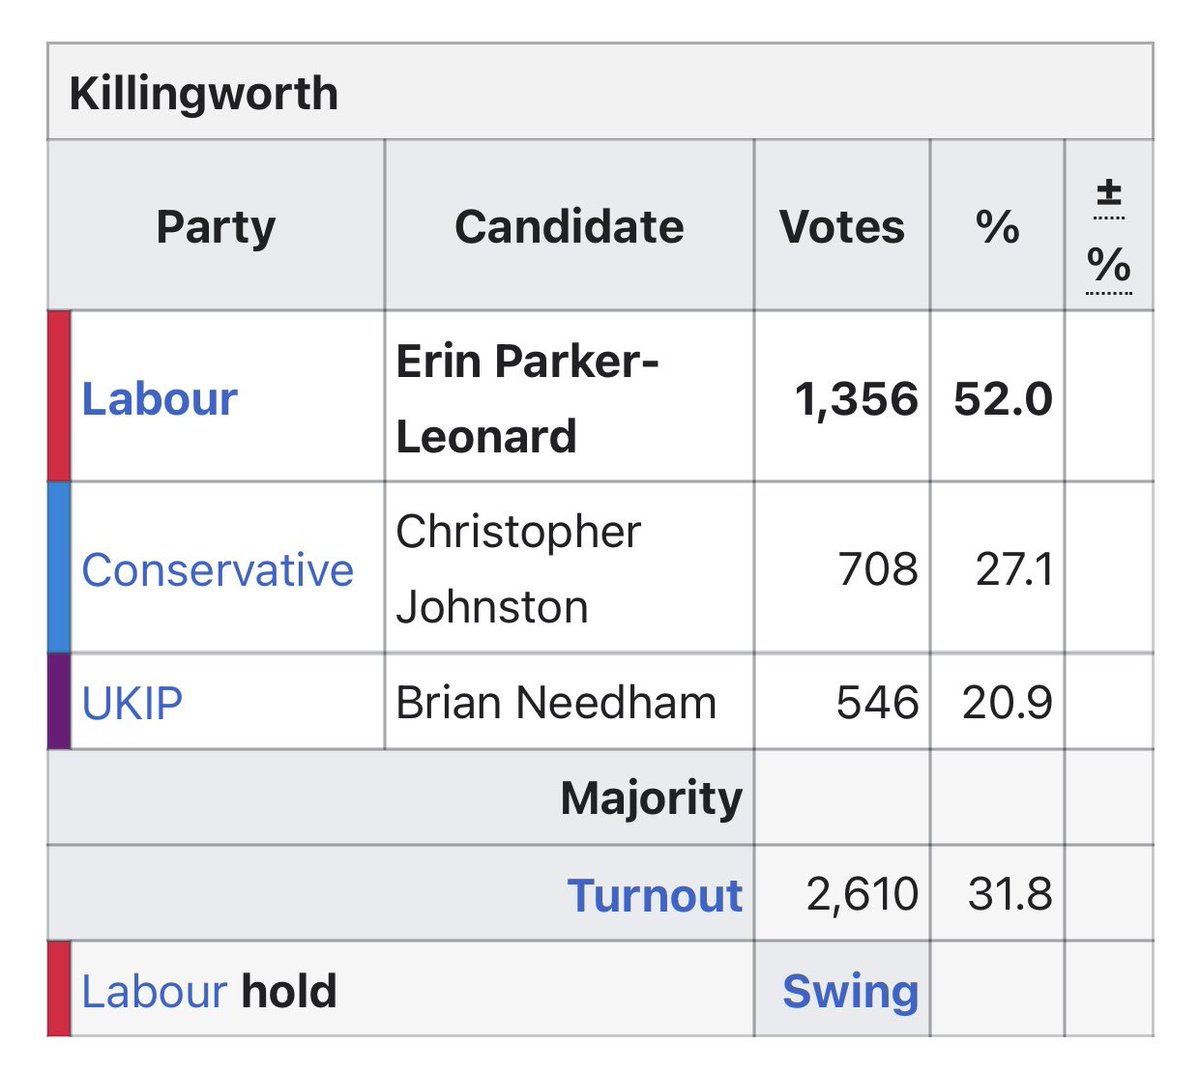 Killingworth is another interesting ward as the Labour vote has gone up a mere +1.0% whilst the Tory vote is up 14.1%. These gains are slowly chipping away at Labour majorities in these wards considered ‘safe seats’.